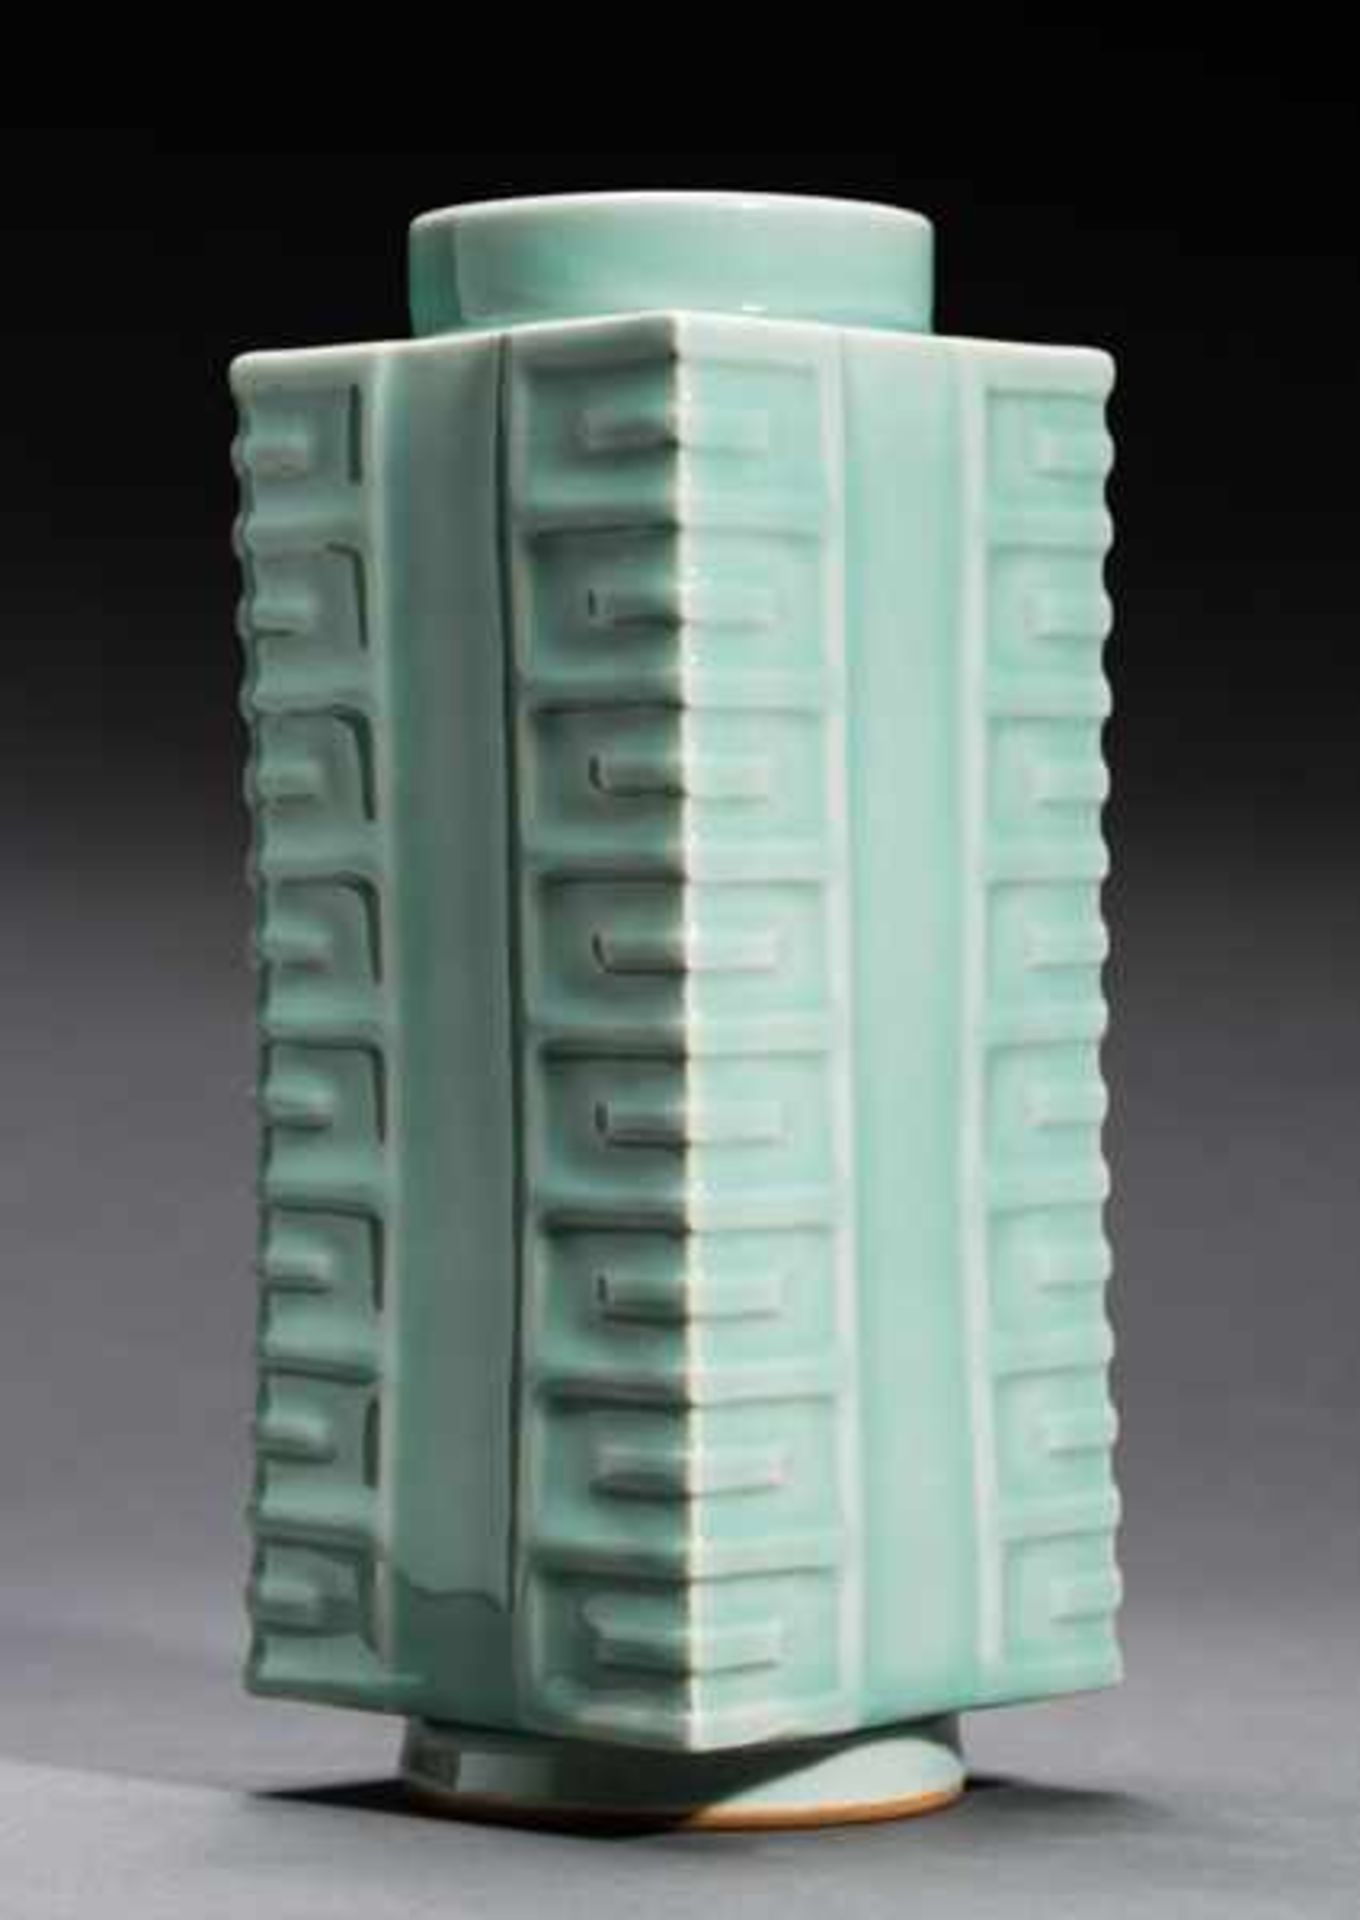 VASE IN THE FORM OF AN ARCHAIC CONG Porcelain with celadon glaze. China, The square, vertical form